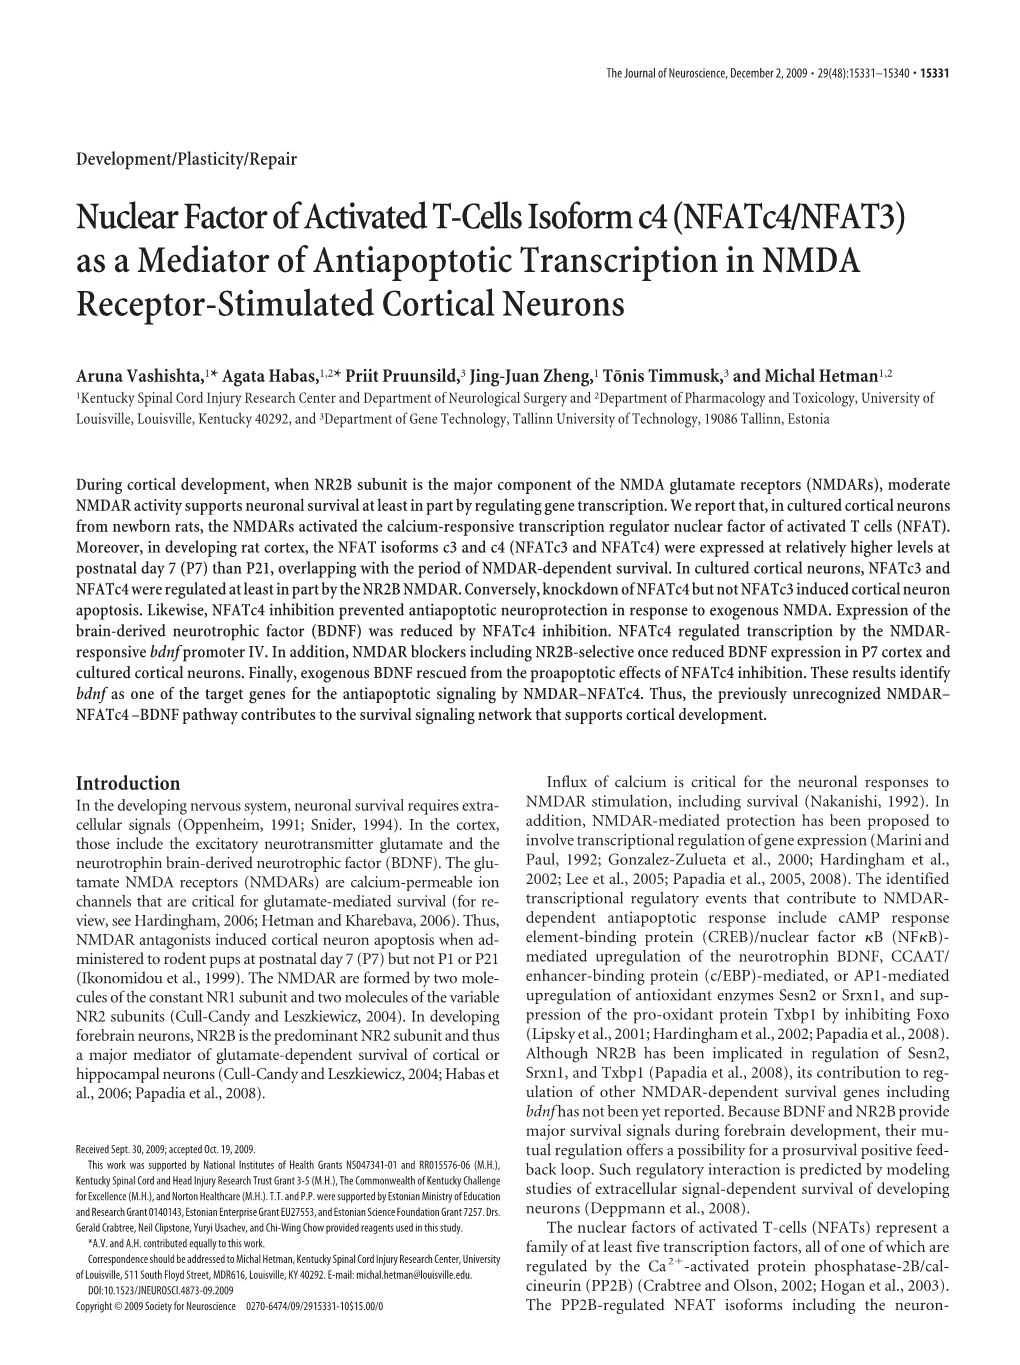 Nuclearfactorofactivatedt-Cellsisoformc4(Nfatc4/NFAT3) As a Mediator of Antiapoptotic Transcription in NMDA Receptor-Stimulated